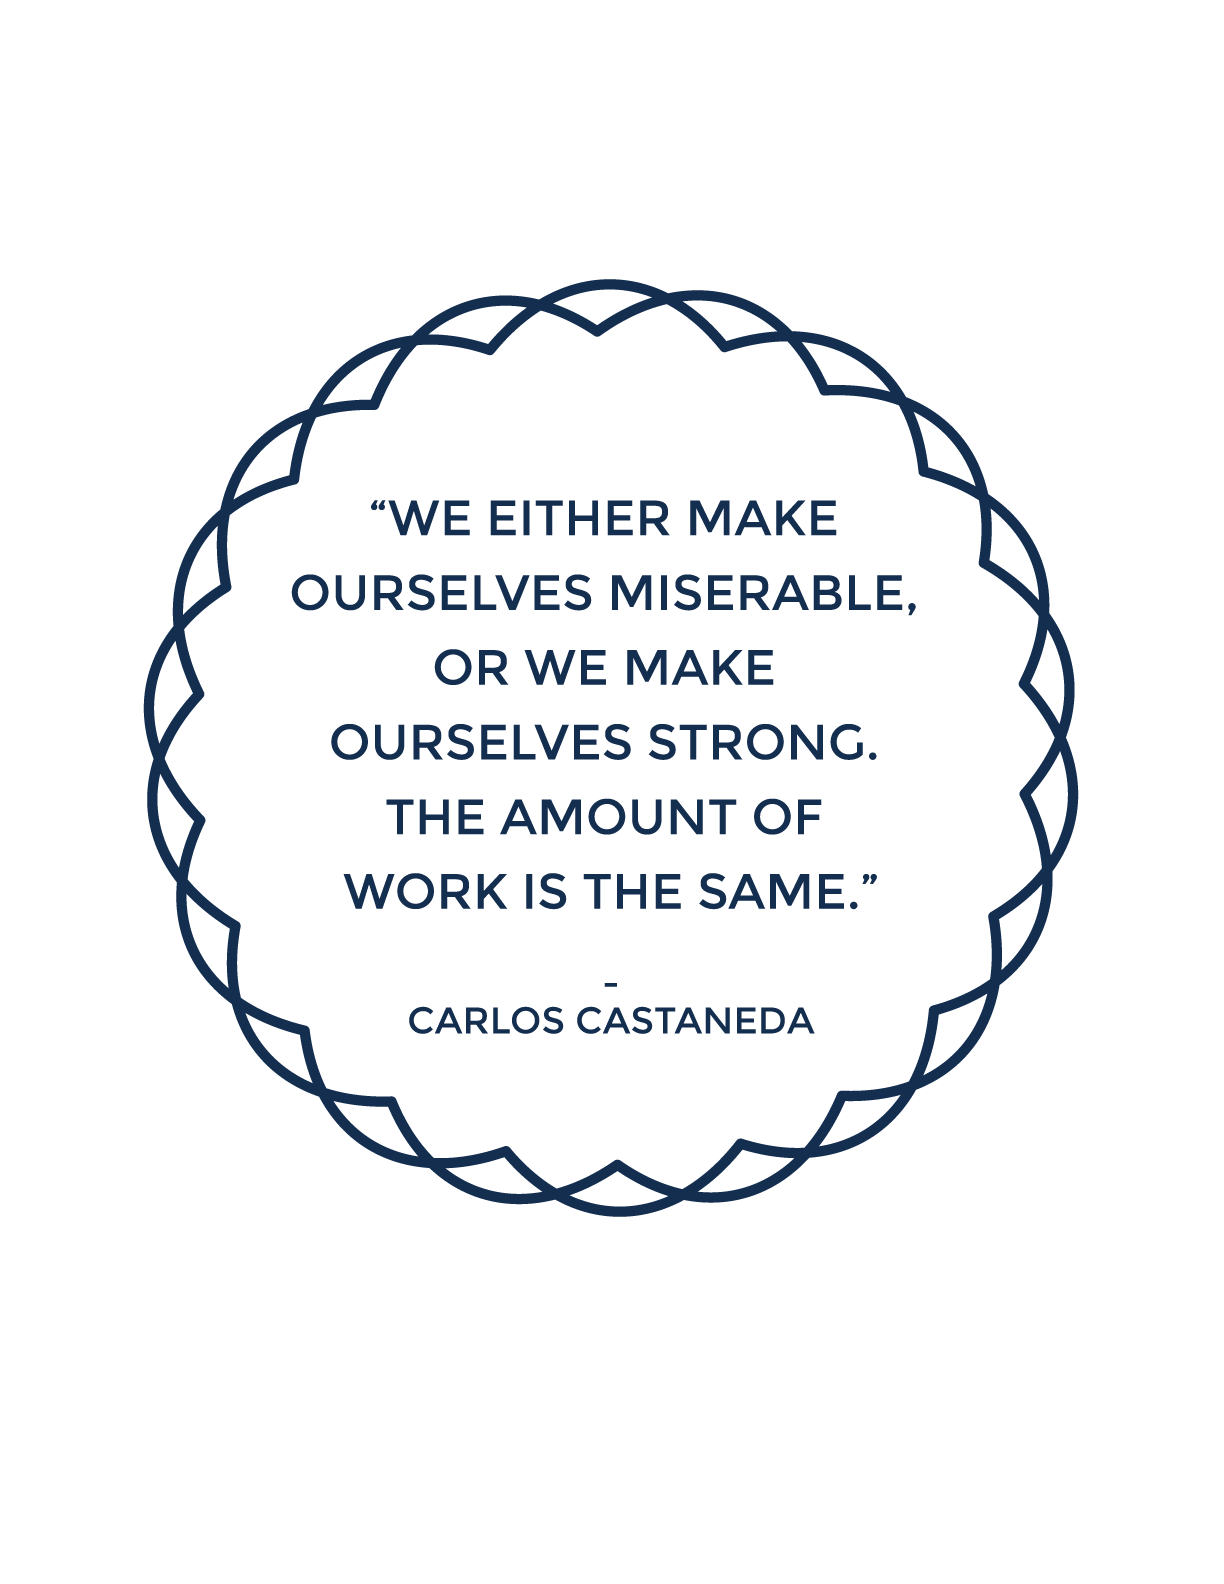 WE-EITHER-MAKE-OURSELVES-MISERABLE,-OR-WE-MAKE-OURSELVES-STRONG.-THE-AMOUNT-OF-WORK-IS-THE-SAME.